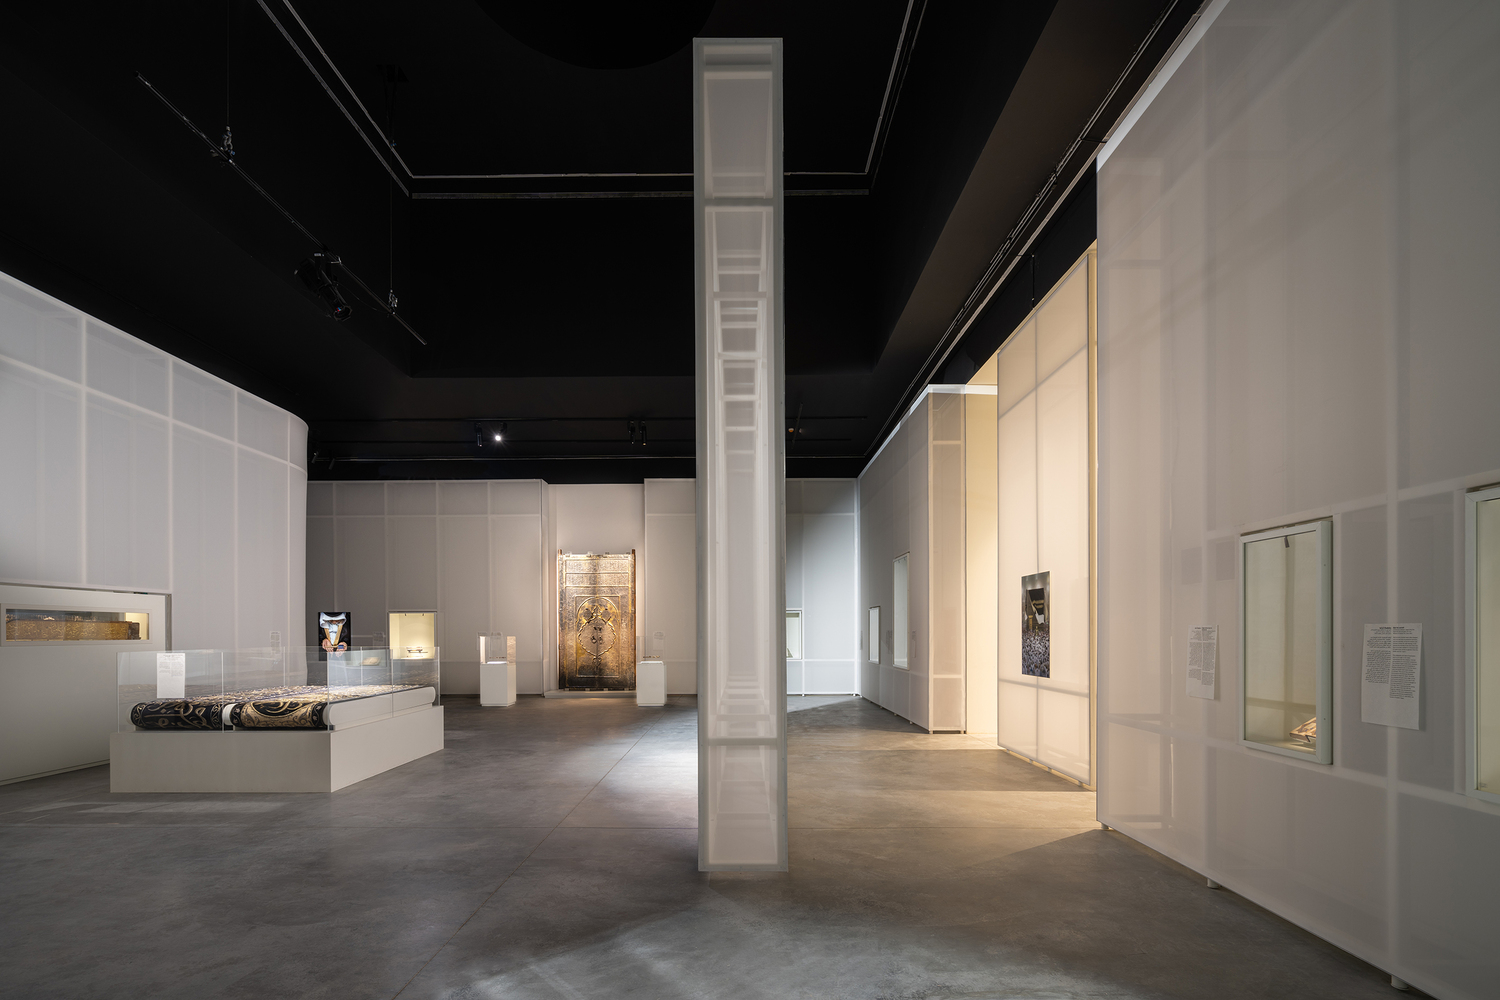 Installation View on the First Islamic Arts Biennale in Jeddah